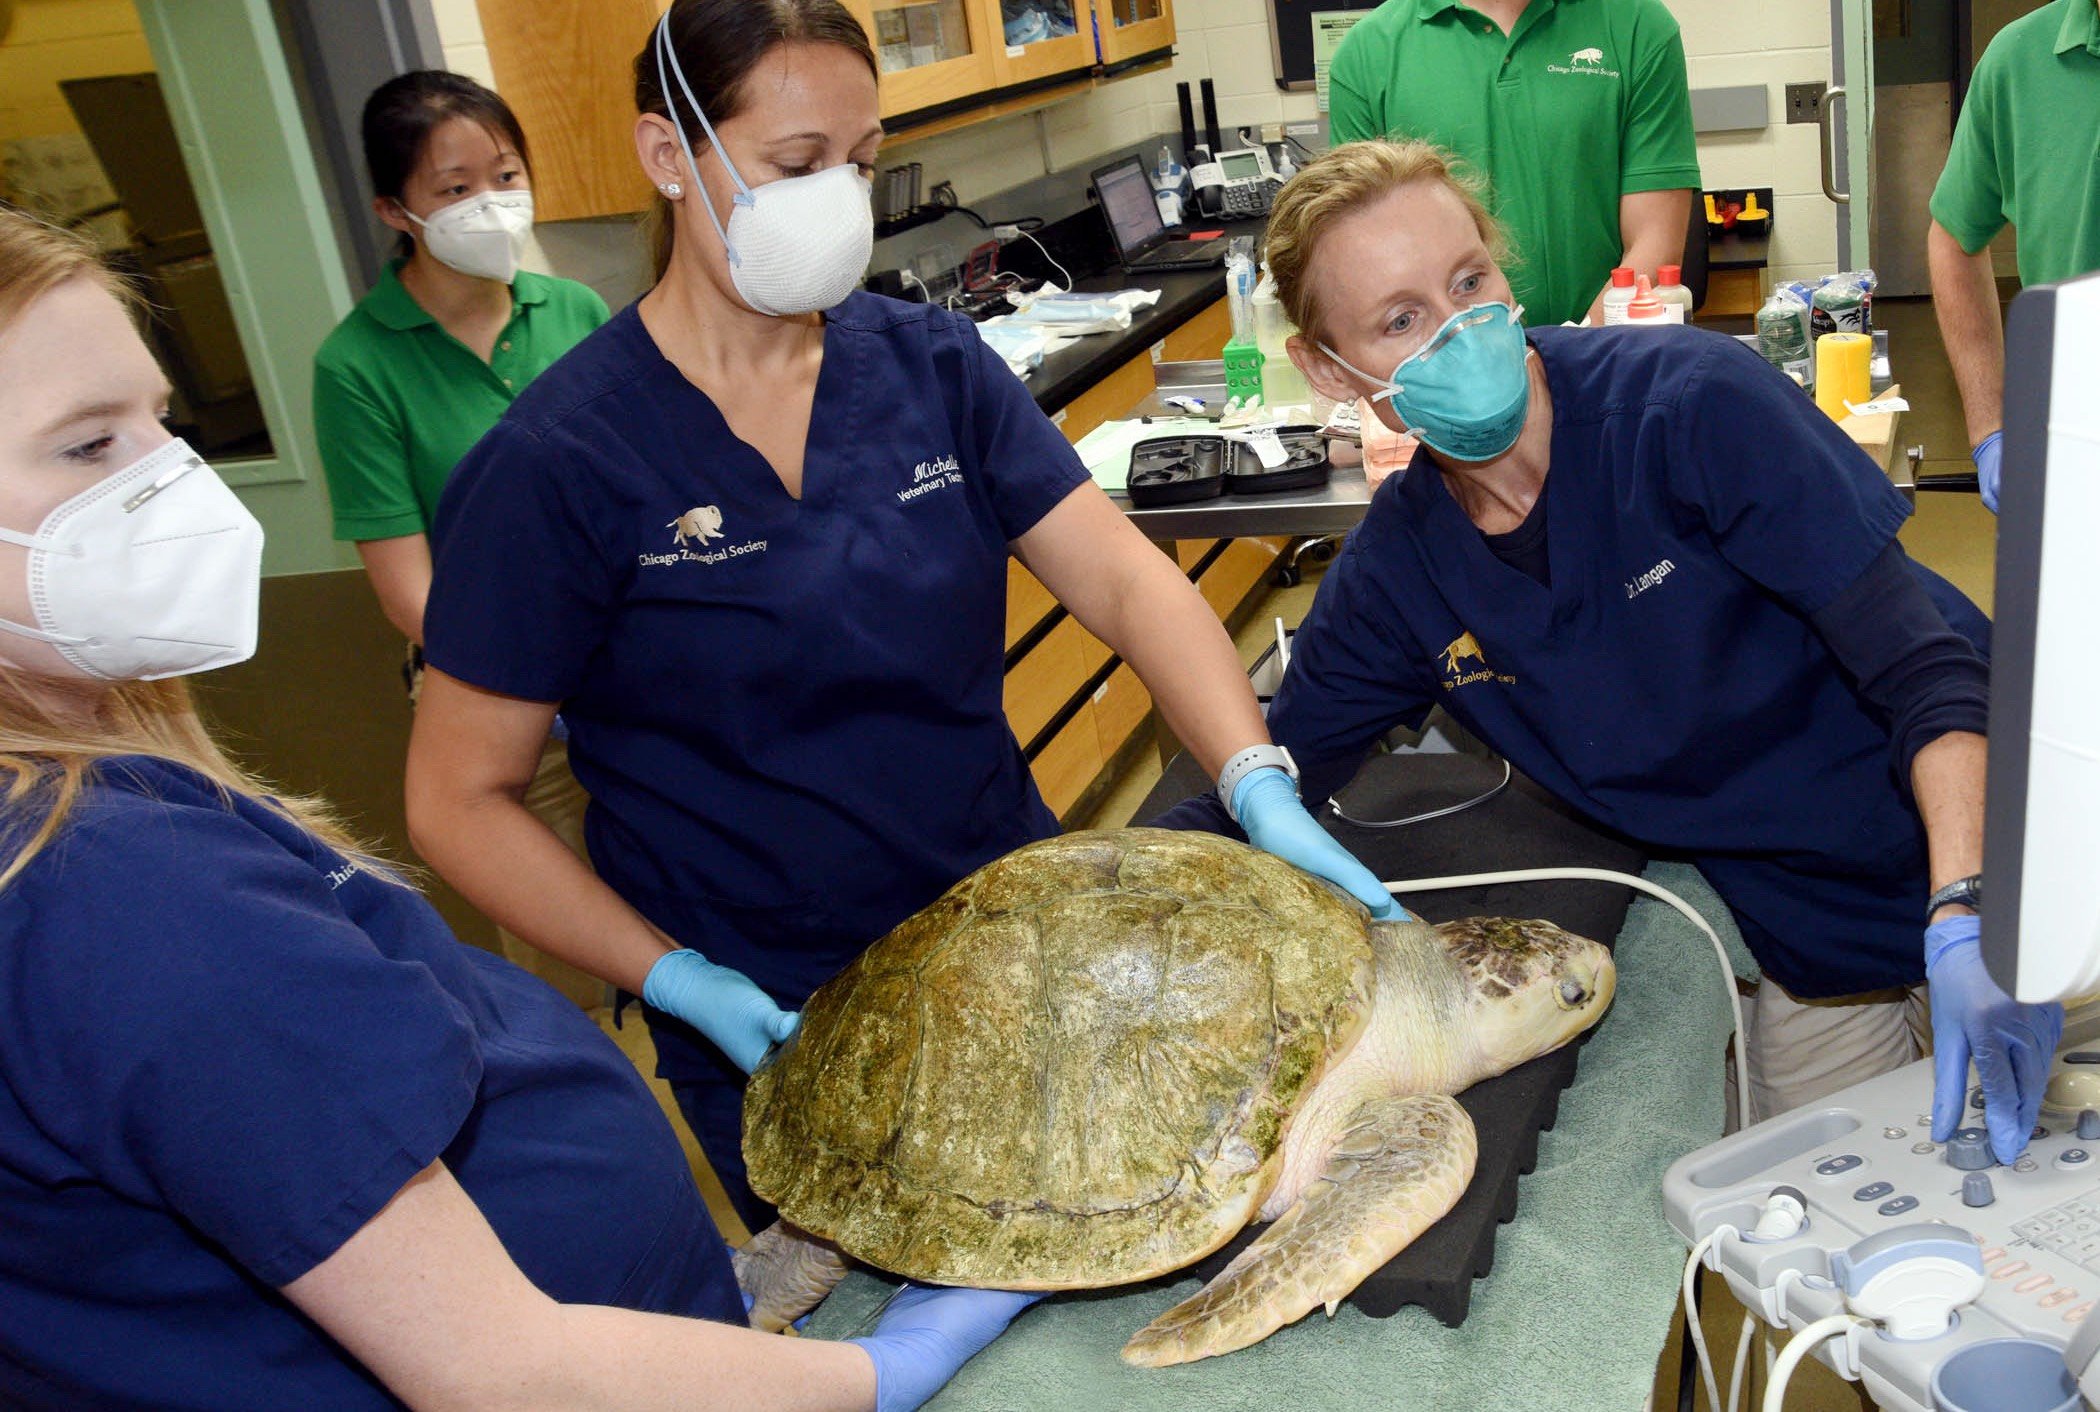 Pistachio, a 13-year-old Kemp’s ridley sea turtle, received a wellness exam by veterinary staff when he arrived at Brookfield Zoo in September. (Jim Schulz / Chicago Zoological Society)